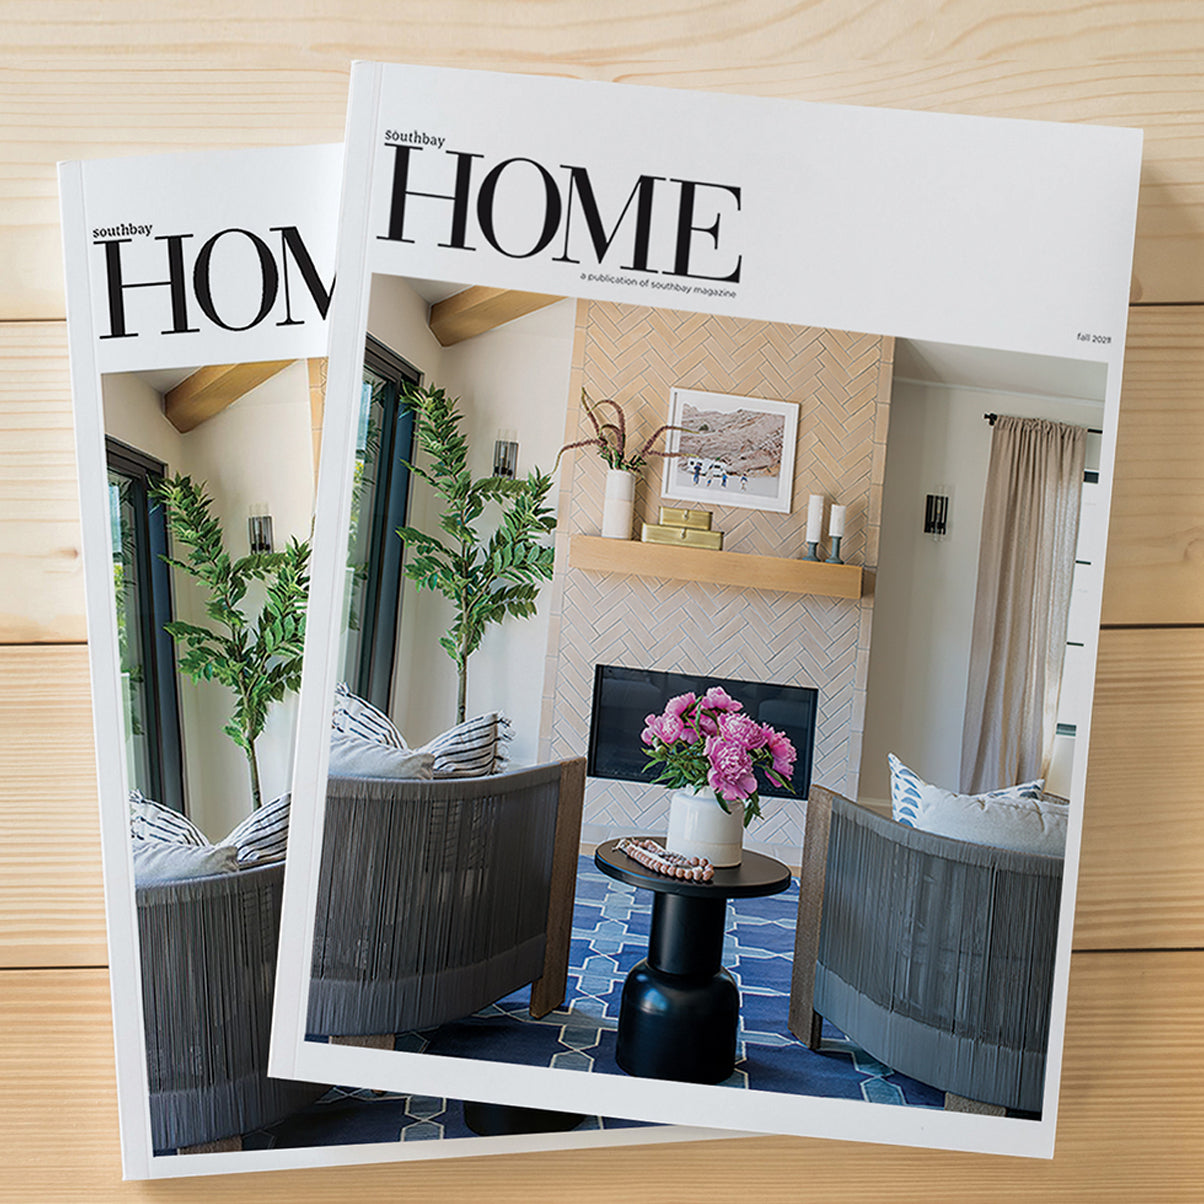 Bianca Ecklund Design featured in southbay home magazine. Livingroom on cover